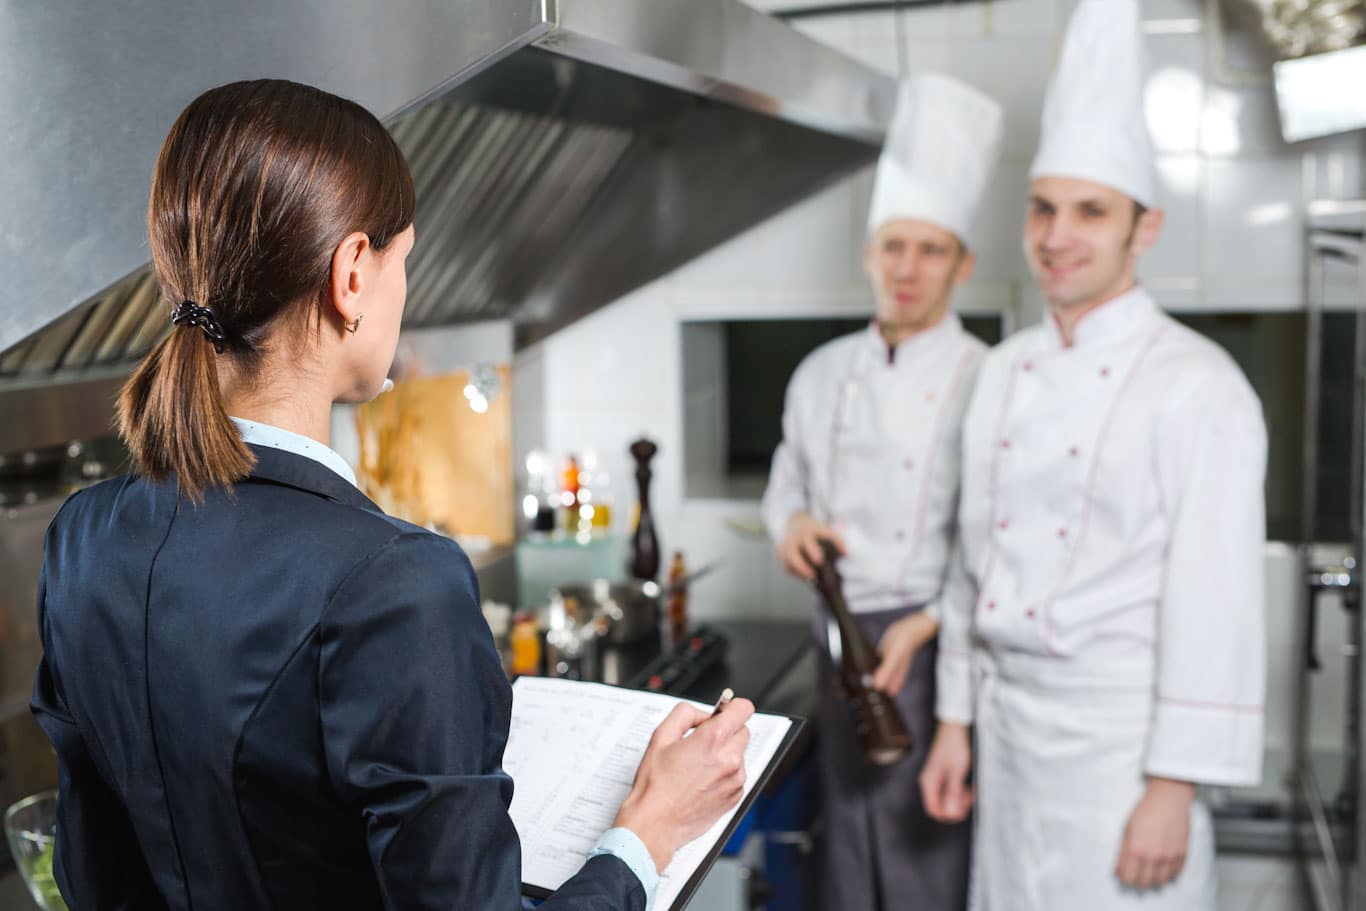 Choosing a restaurant health inspection checklist is difficult without 1streporting.com